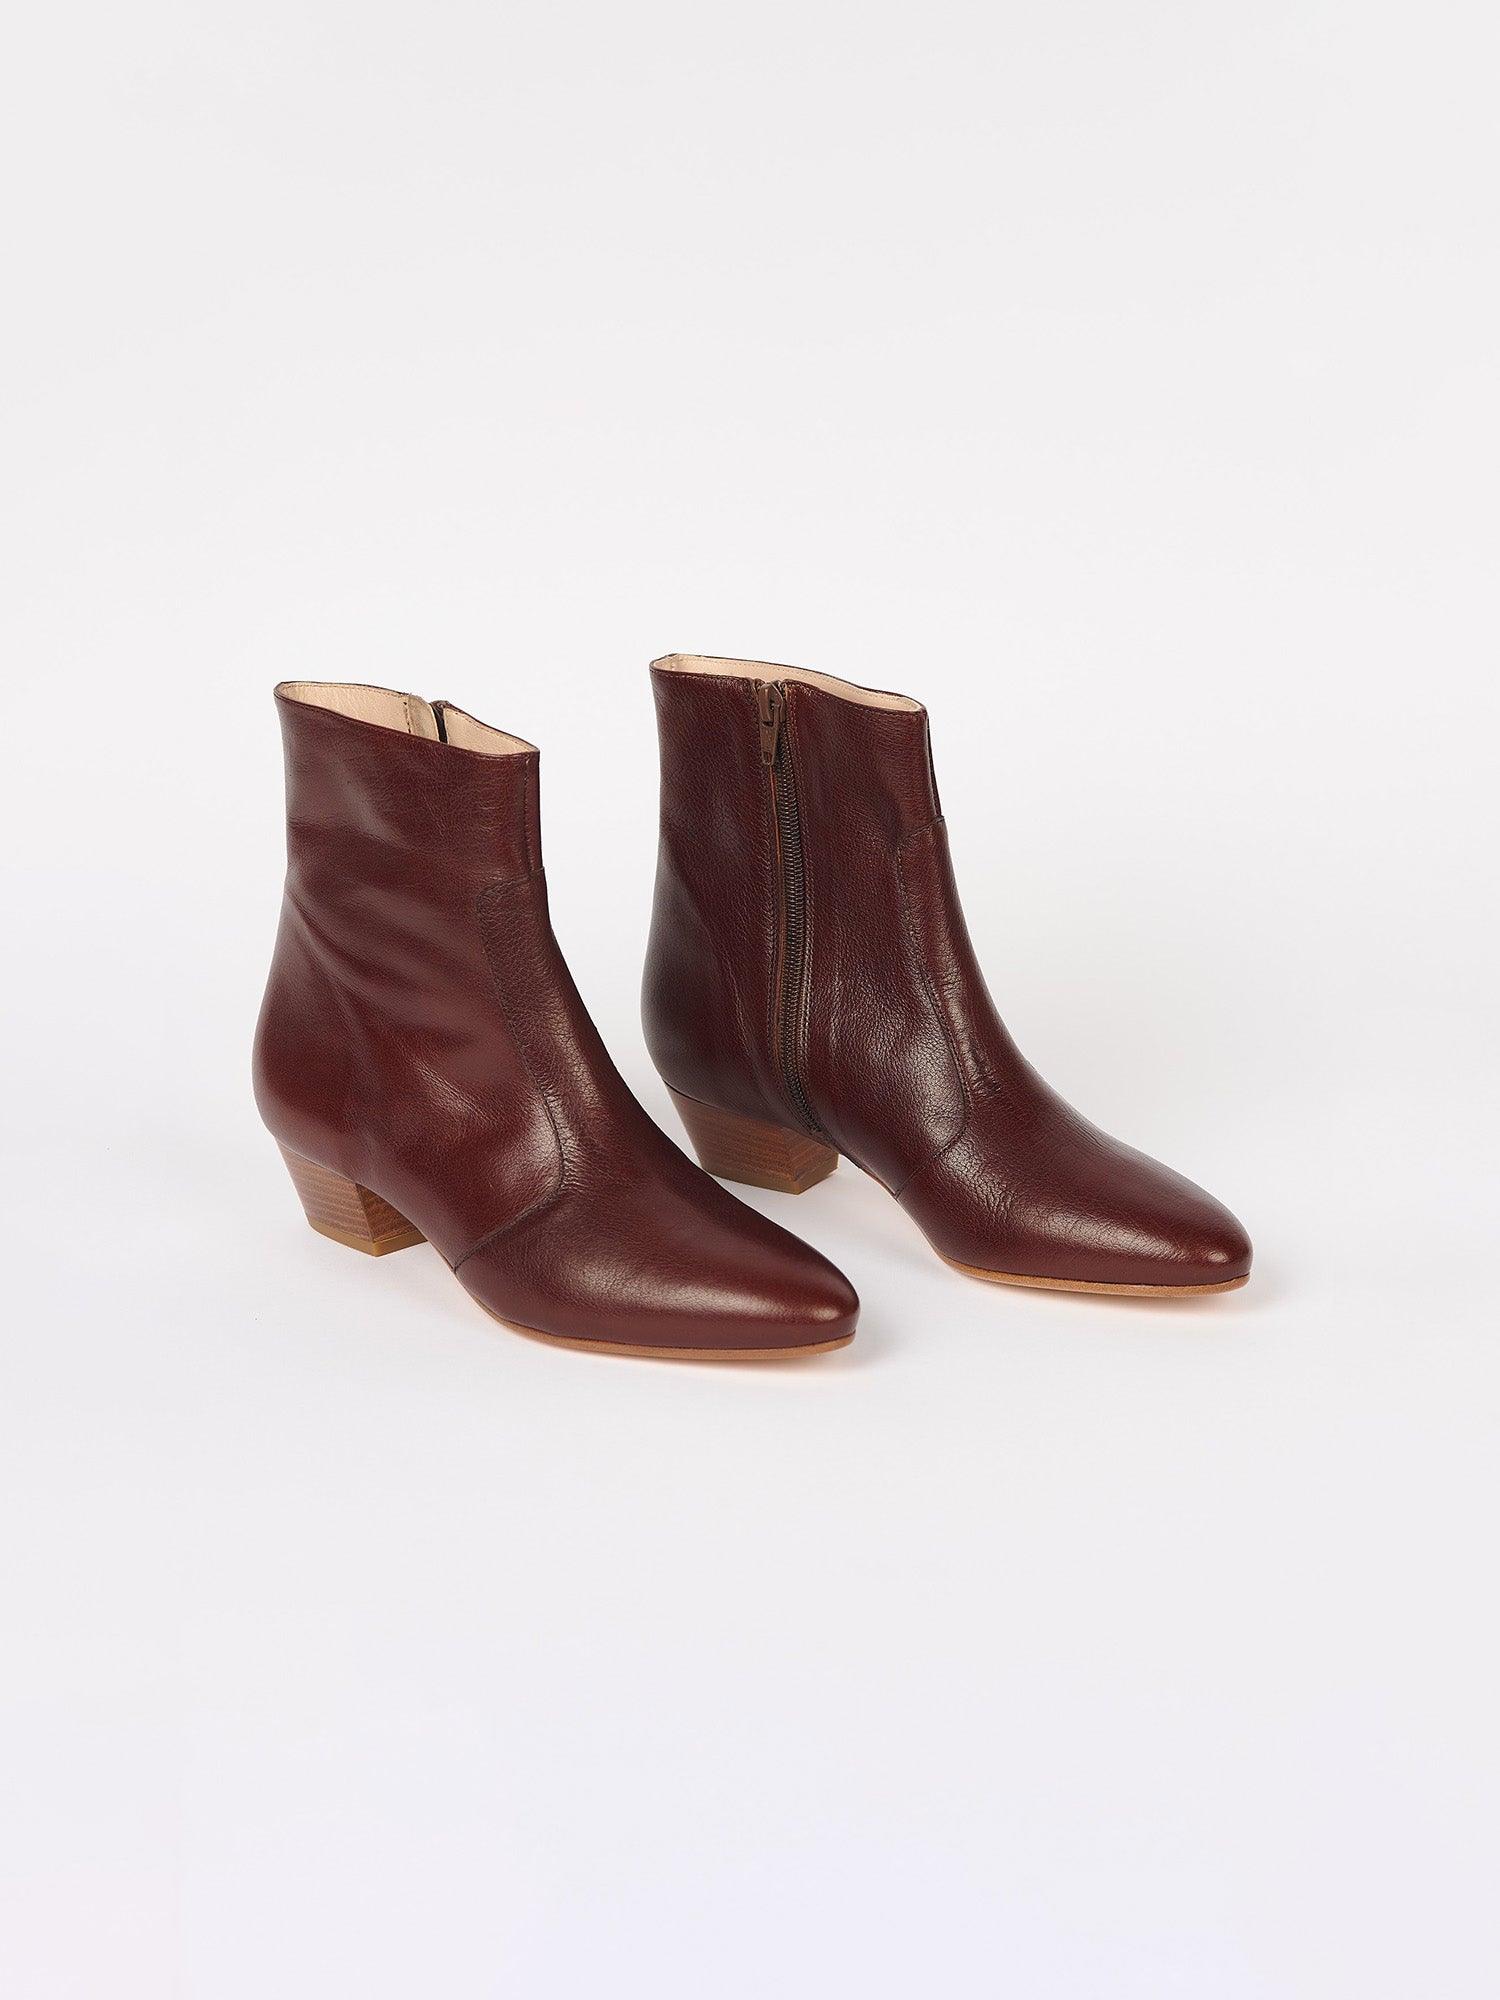 Beatnik Boot in Oxblood Angled front view